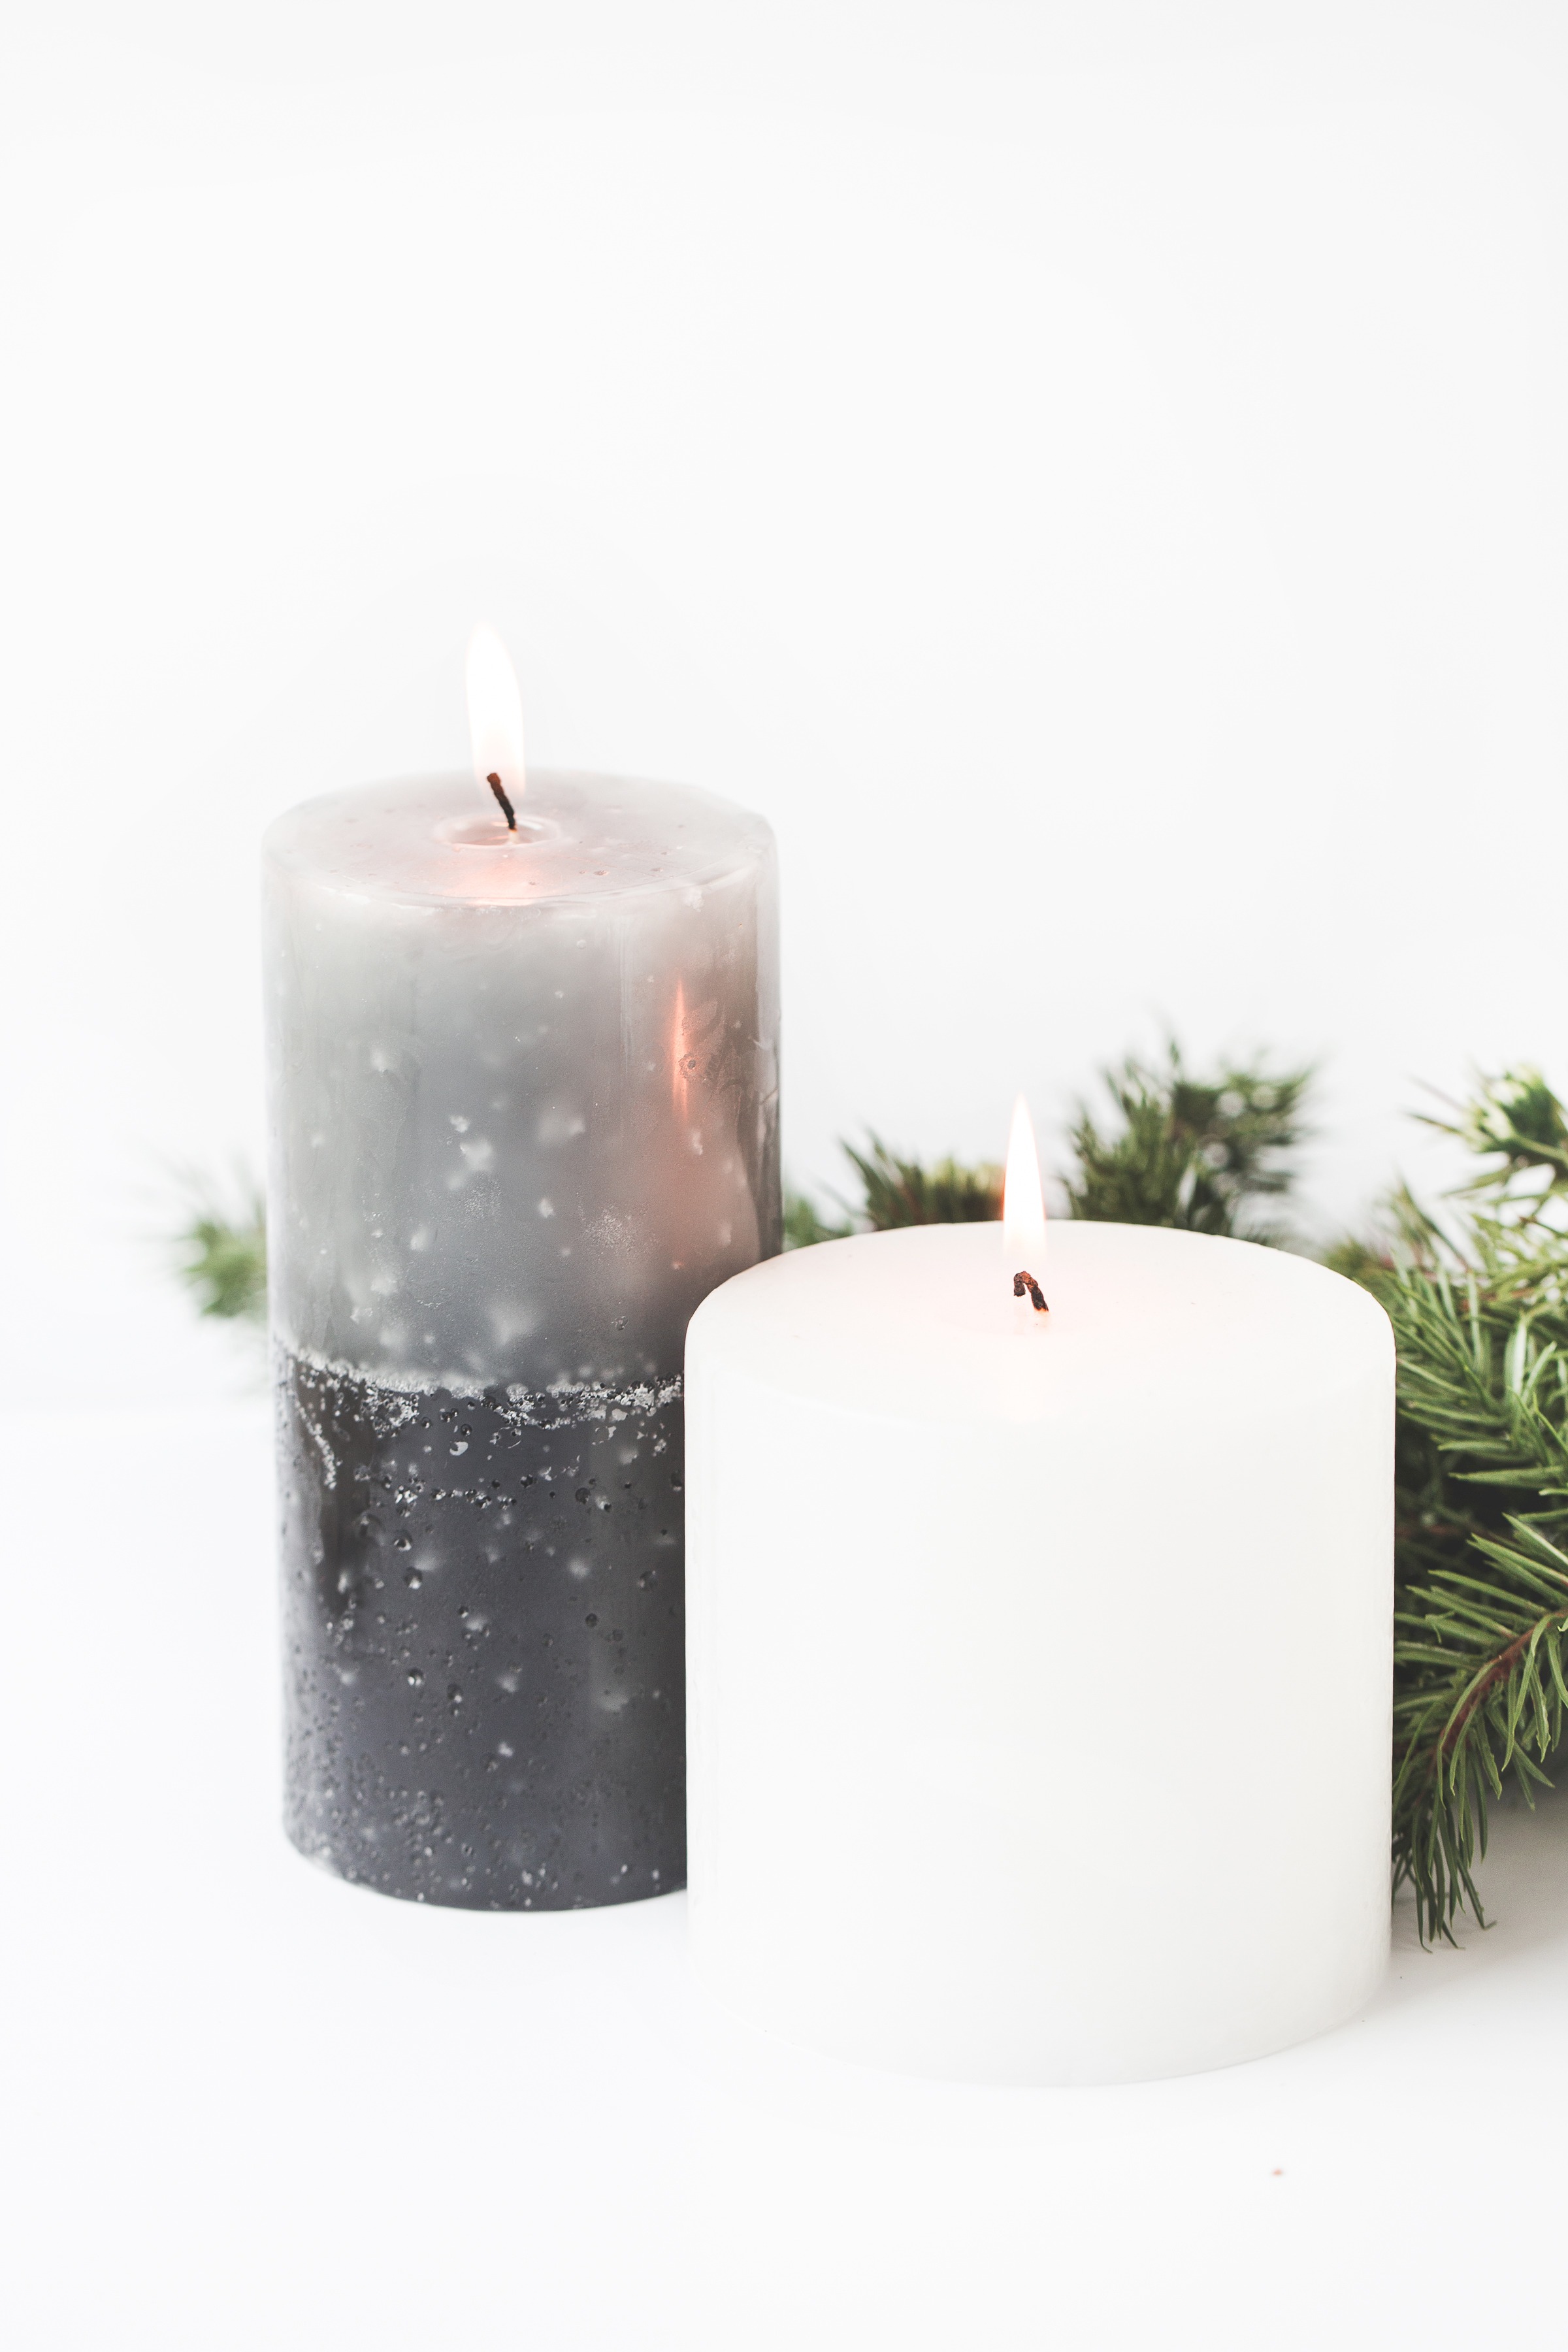 The Best Candles to Make Your House More Festive 78